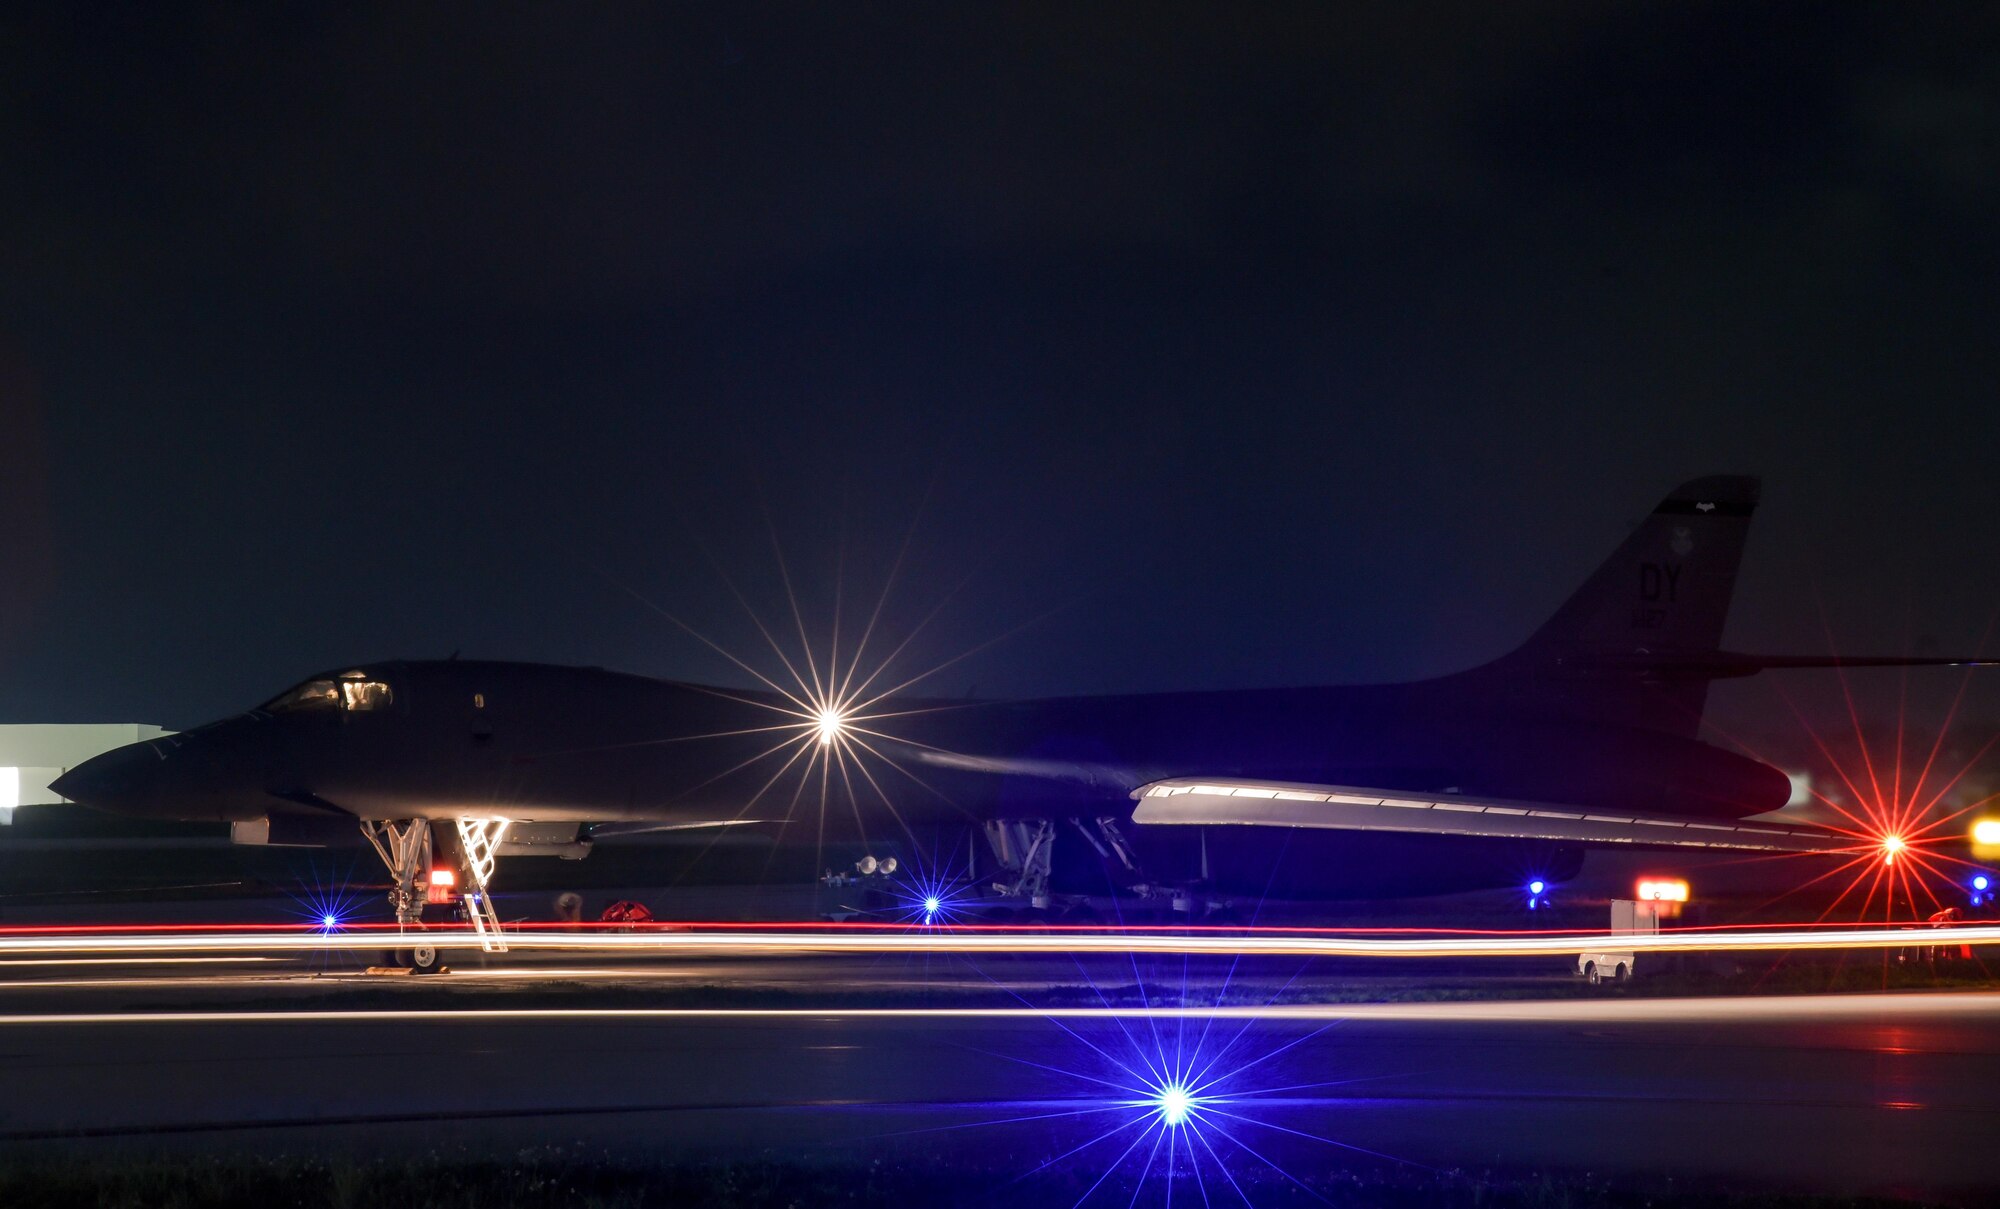 A U.S. Air Force B-1B Lancer assigned to the 9th Expeditionary Bomb Squadron, deployed from Dyess Air Force Base, Texas, prepares for take off from Andersen Air Force Base, Guam to conduct bilateral training mission with Royal Australian Air Force Joint Terminal Attack Controllers (JTACs) on July 18. The mission is part of Talisman Saber 17 a training exercise designed to maximize combined training opportunities and conduct maritime preposition and logistics operations in the Pacific. (U.S. Air Force Photo by Staff Sgt. Joshua Smoot)